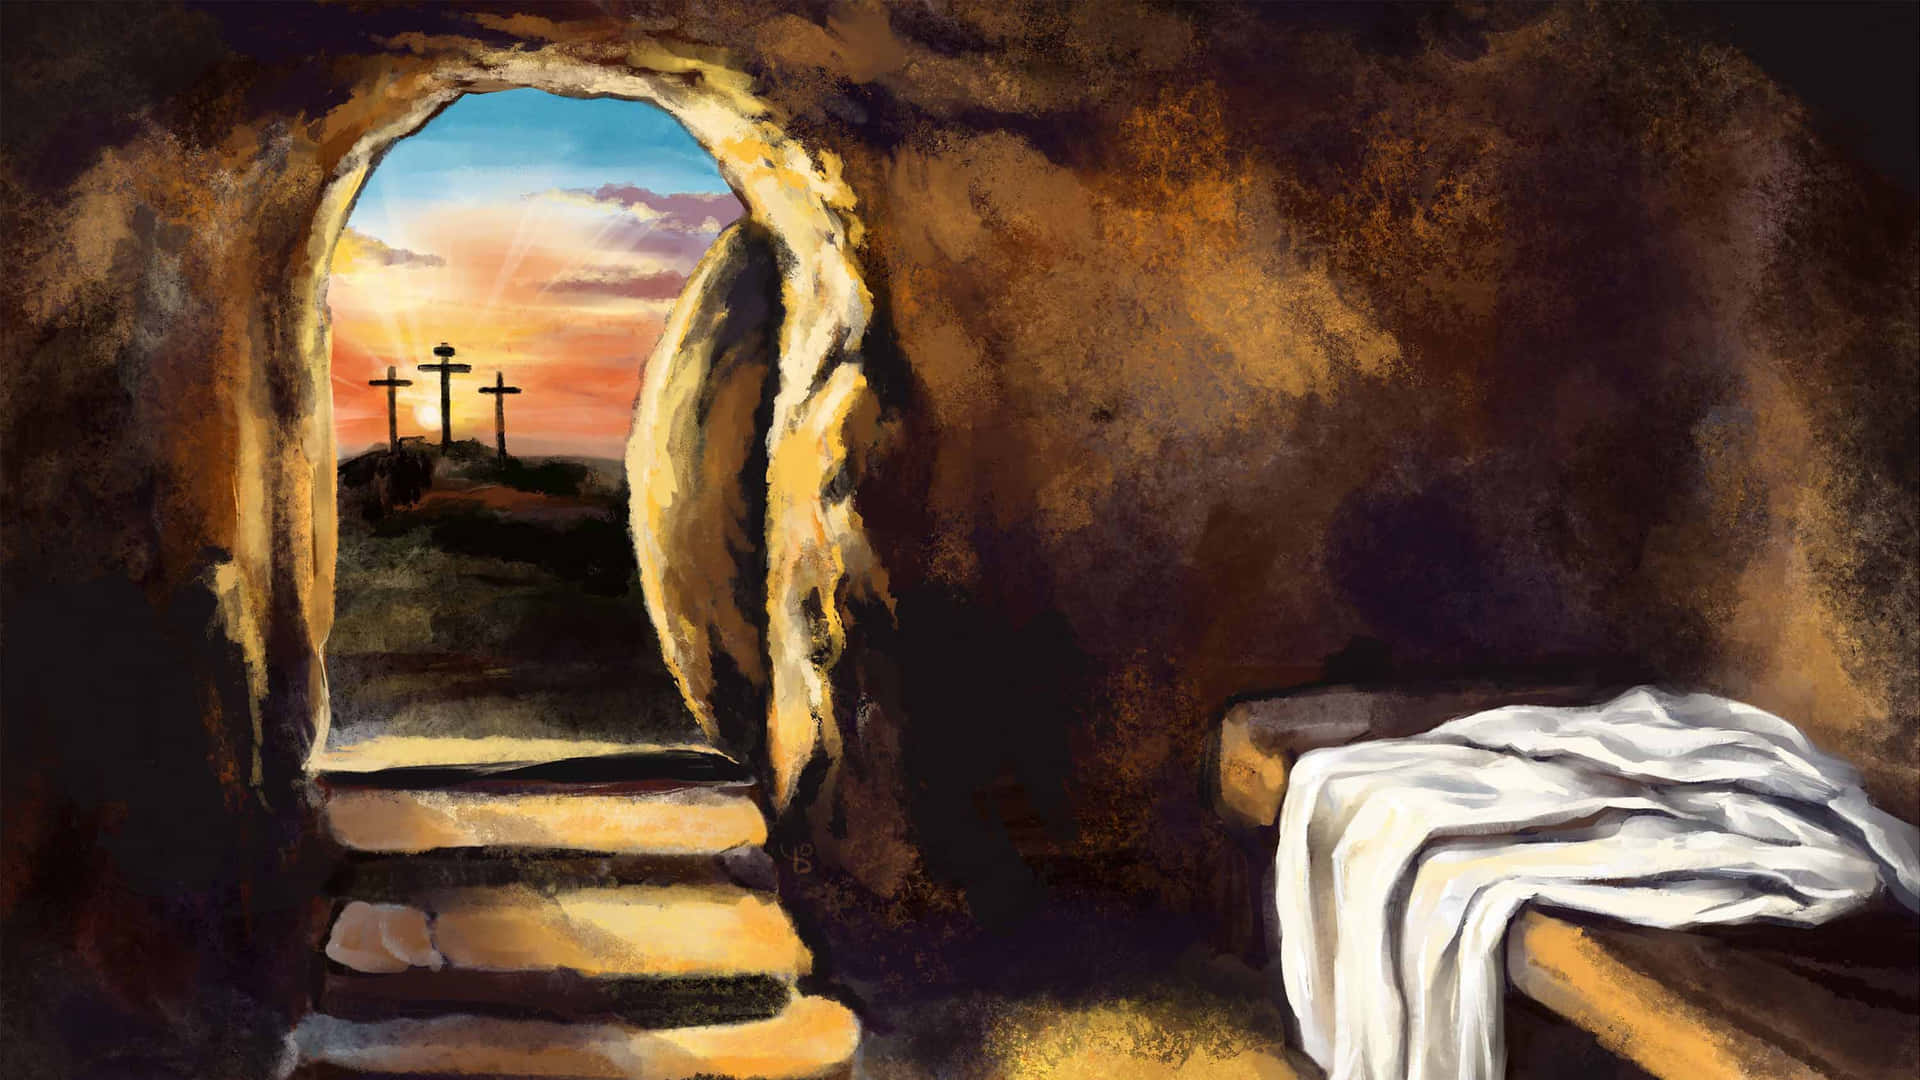 Jesus's Resurrection is a profound symbol of hope and new beginnings